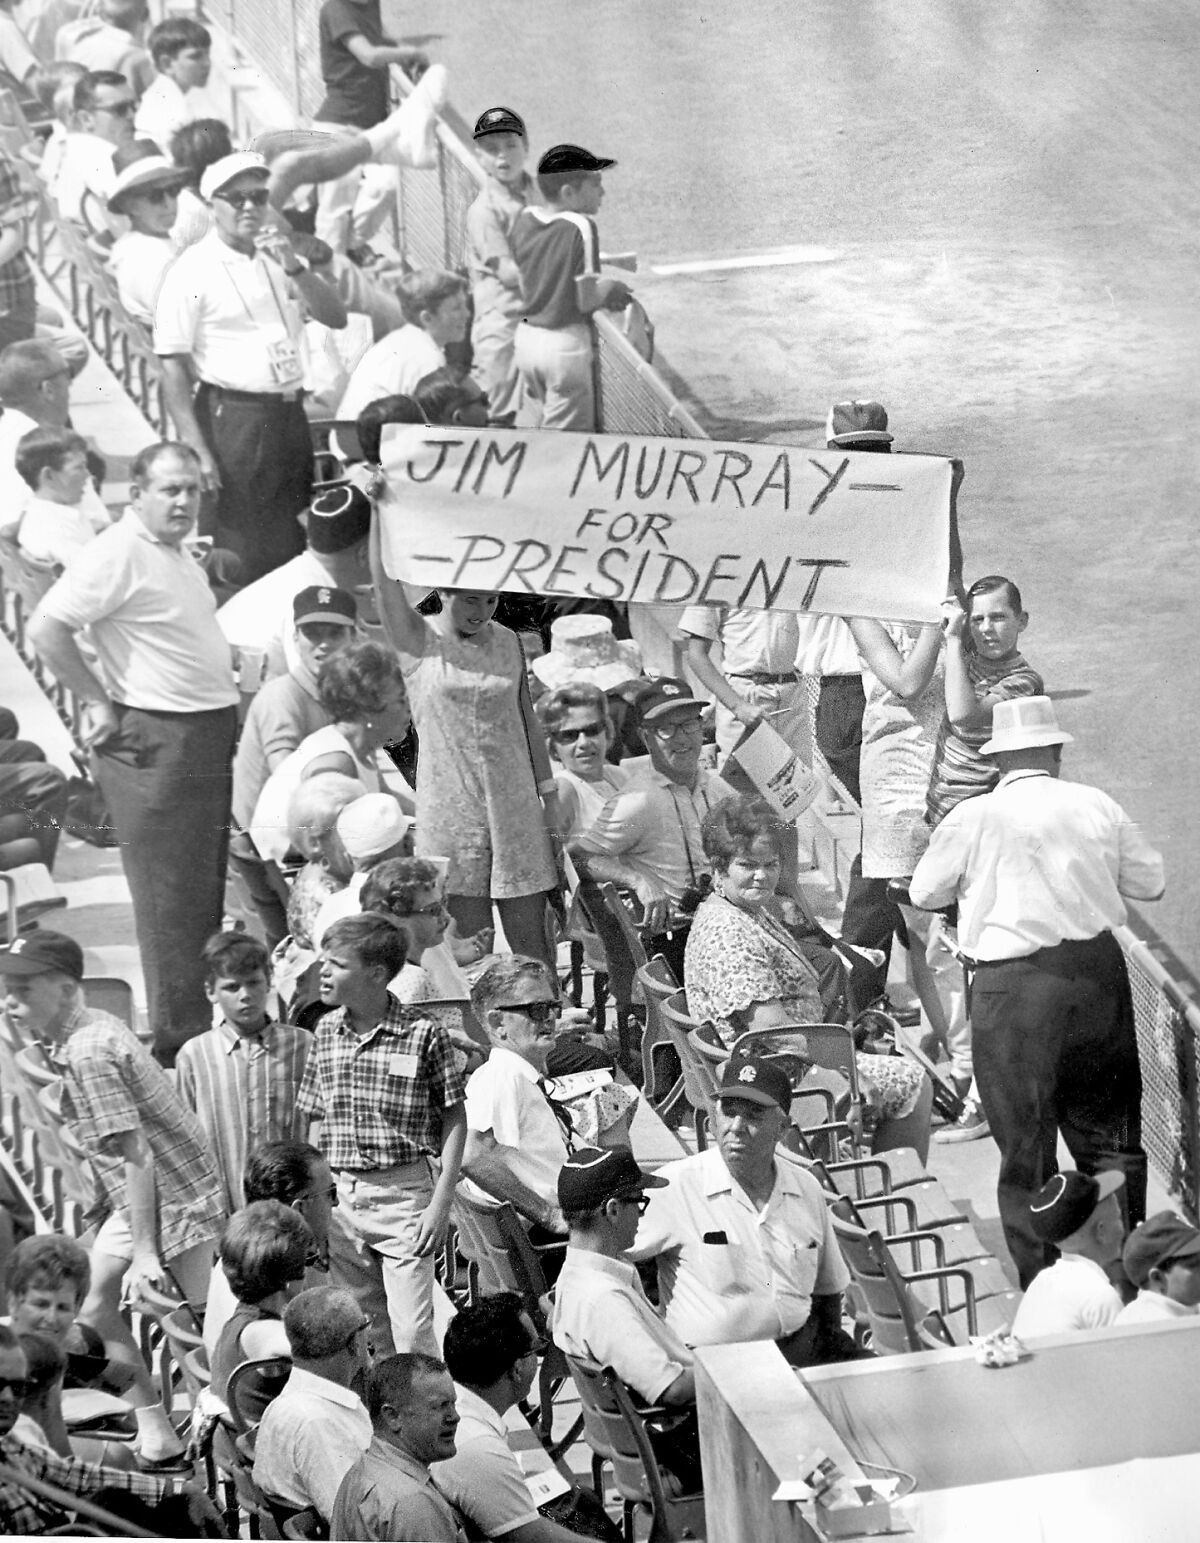 Fans hold up a sign, "Jim Murray for President" during the 1967 MLB All-Star Game at Angel Stadium.